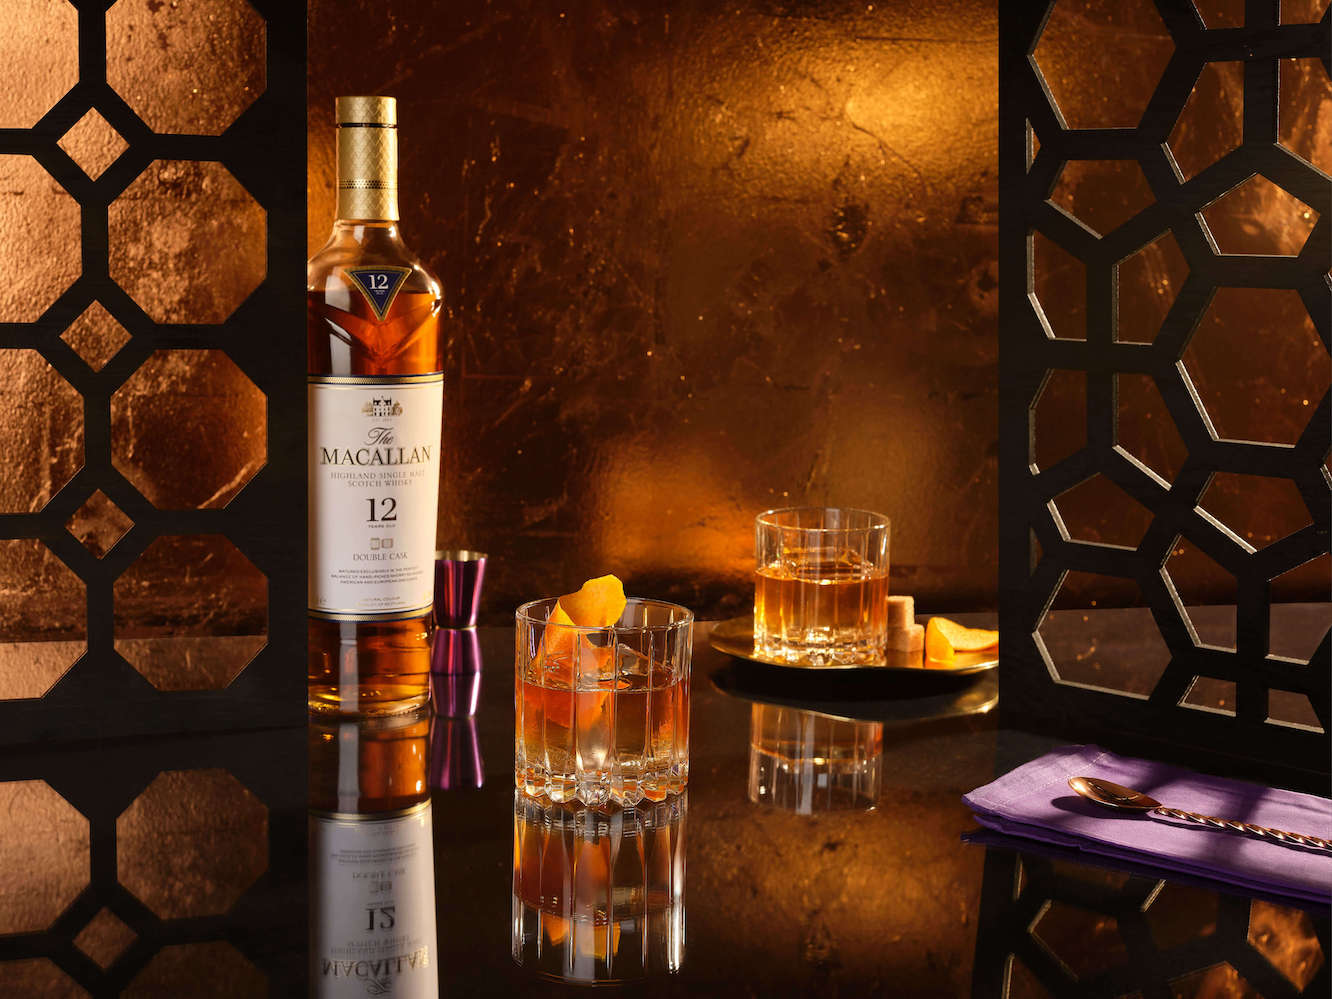 The Macallan Old Fashioned cocktail. Image courtesy The Macallan.